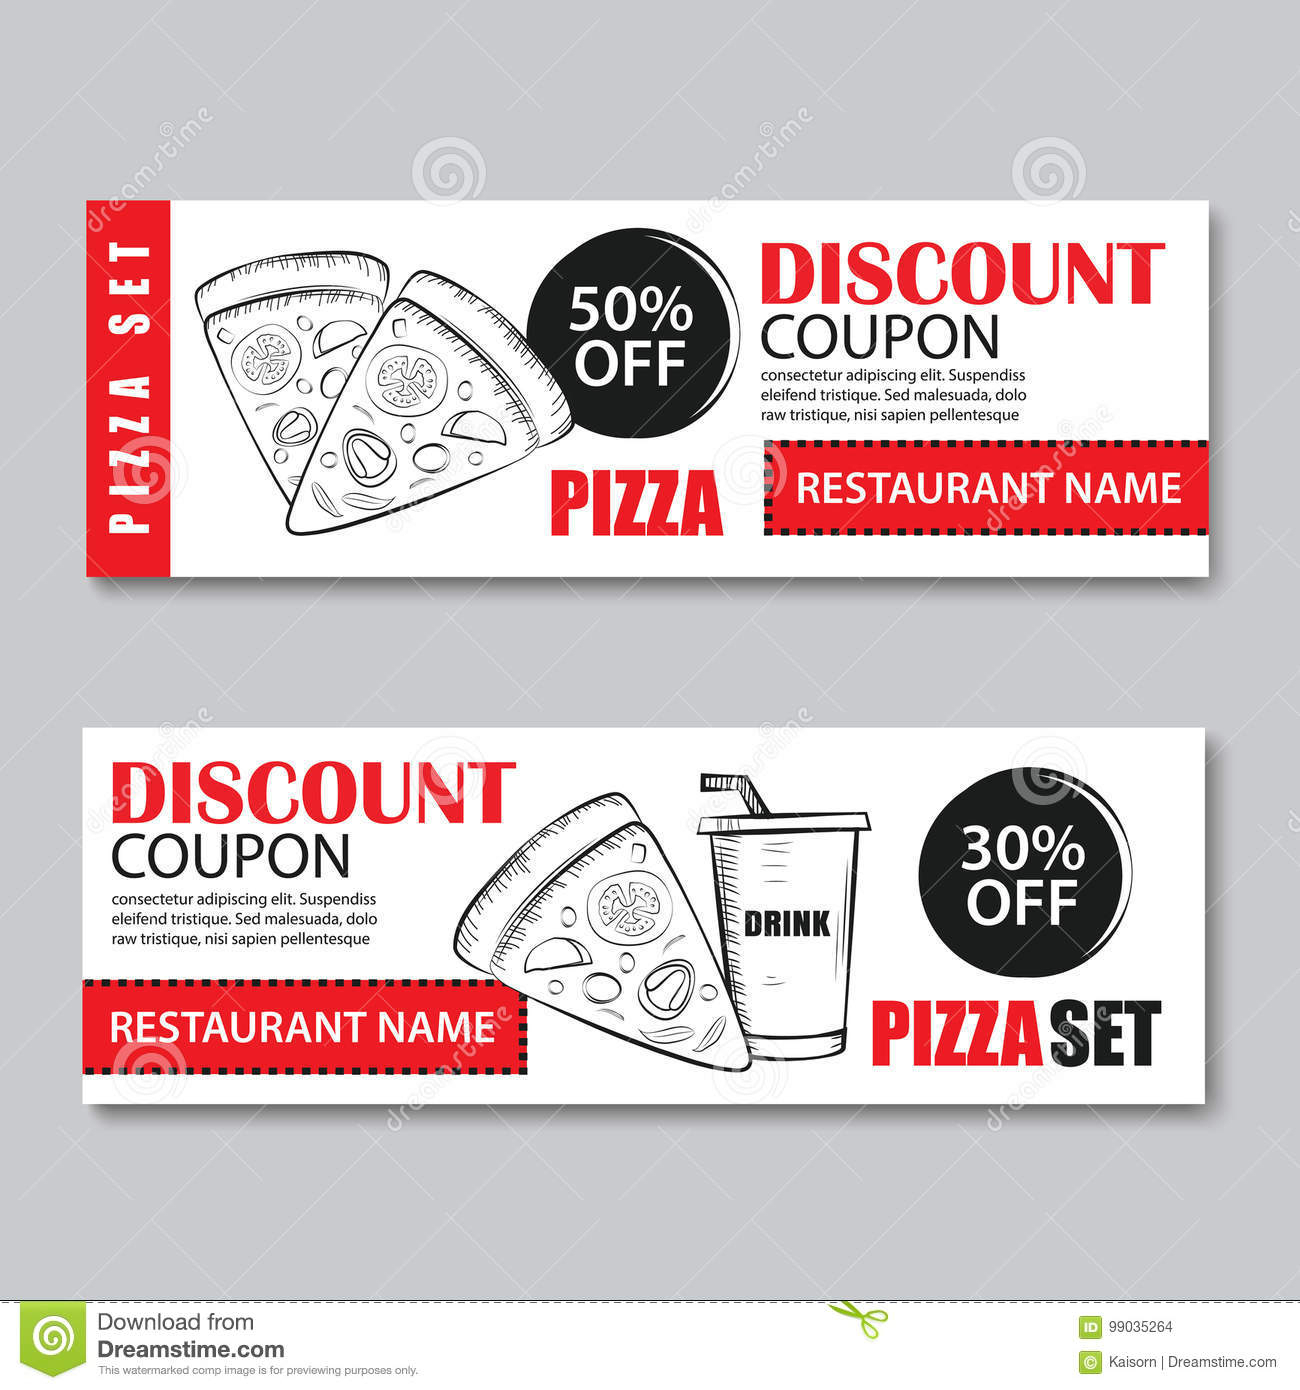 Fast Food Gift Voucher And Coupon Sale Discount Template With Regard To Pizza Gift Certificate Template